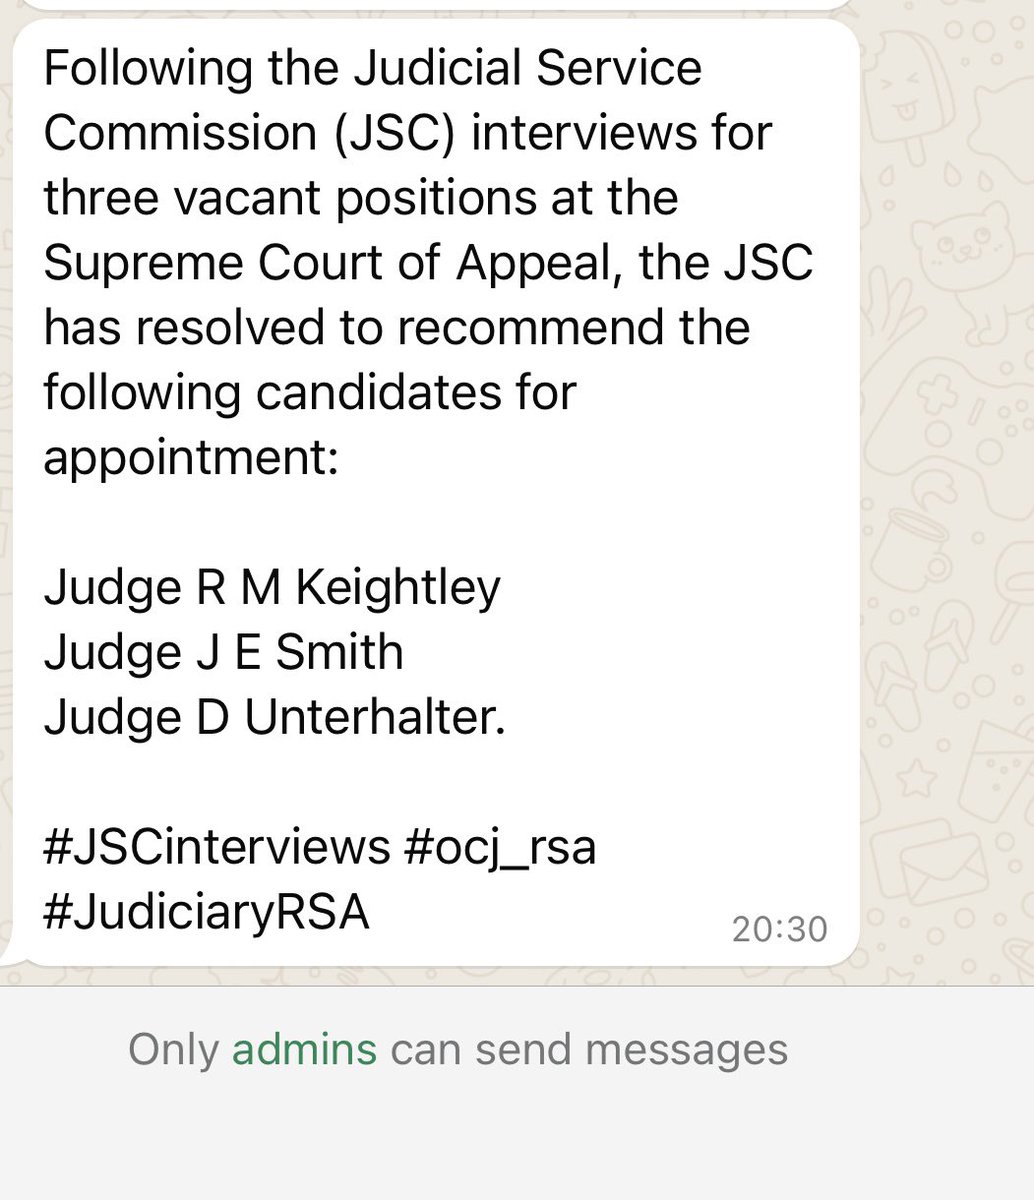 The JSC has resolved to recommend the following candidates for appointment to the Supreme Court of Appeal: 

Judge Raylene Keightley 
Judge John Smith 
Judge David Unterhalter 

#sabcnews